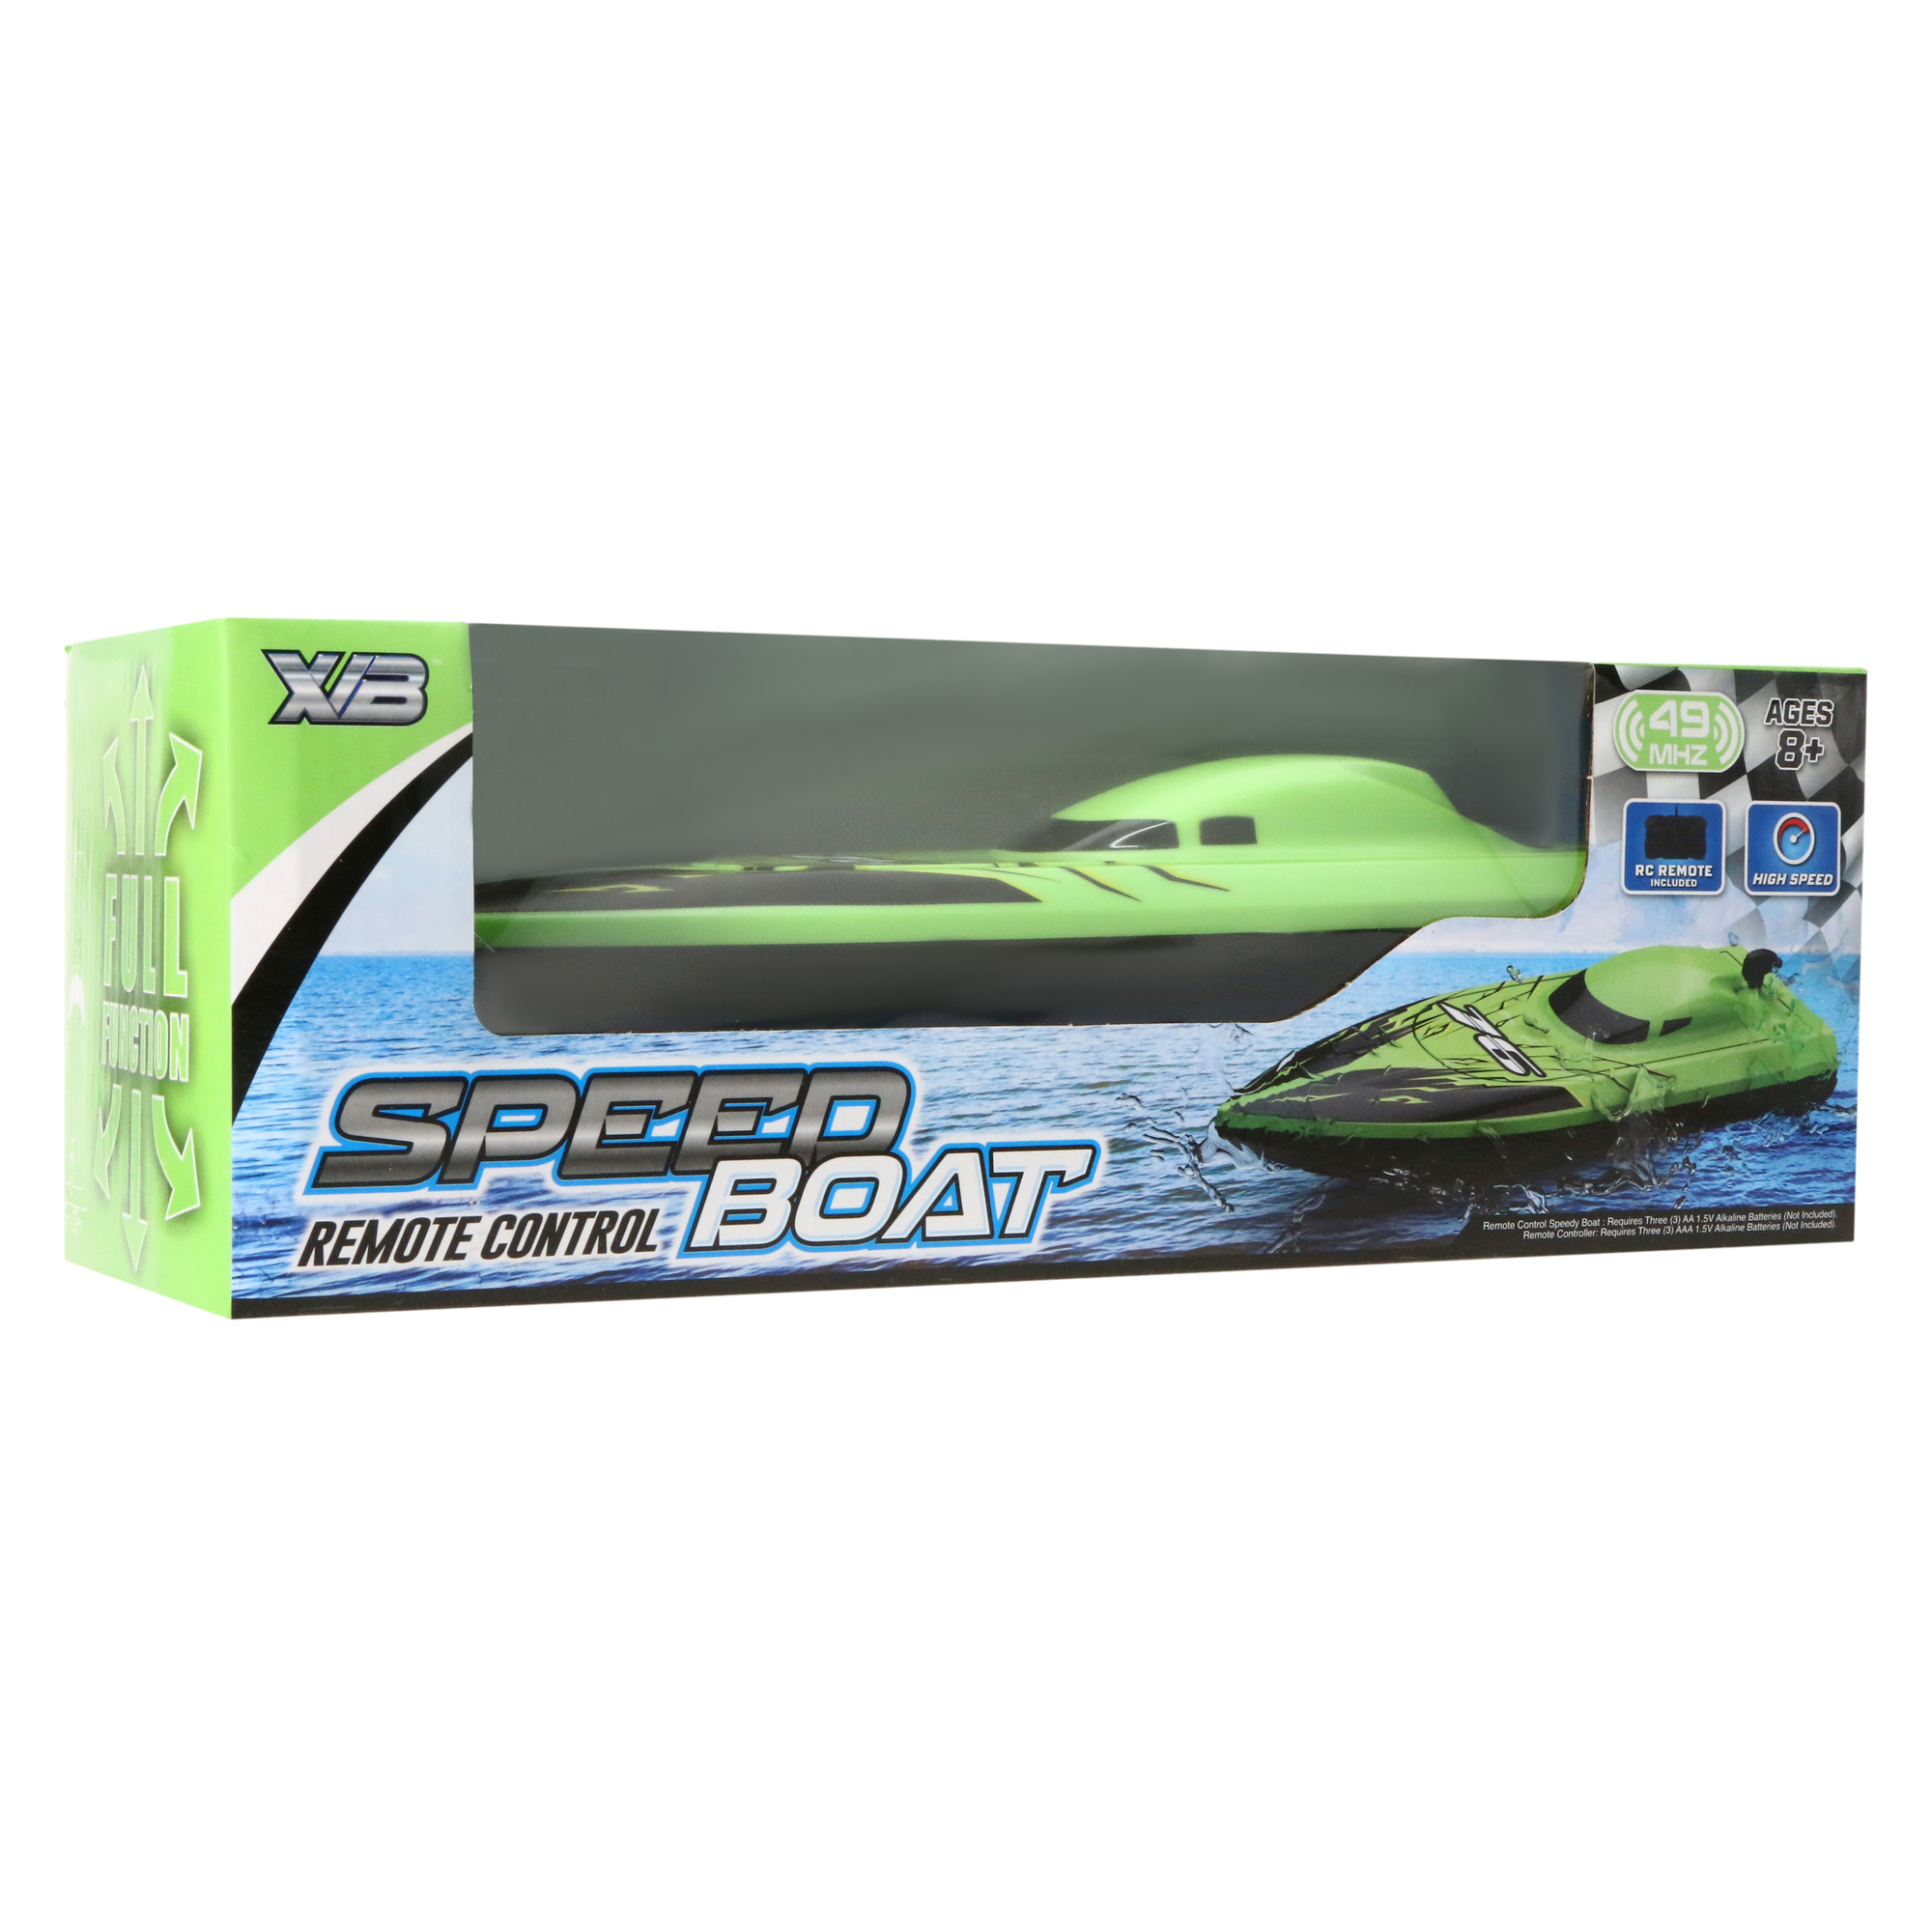 remote control speed boat toy